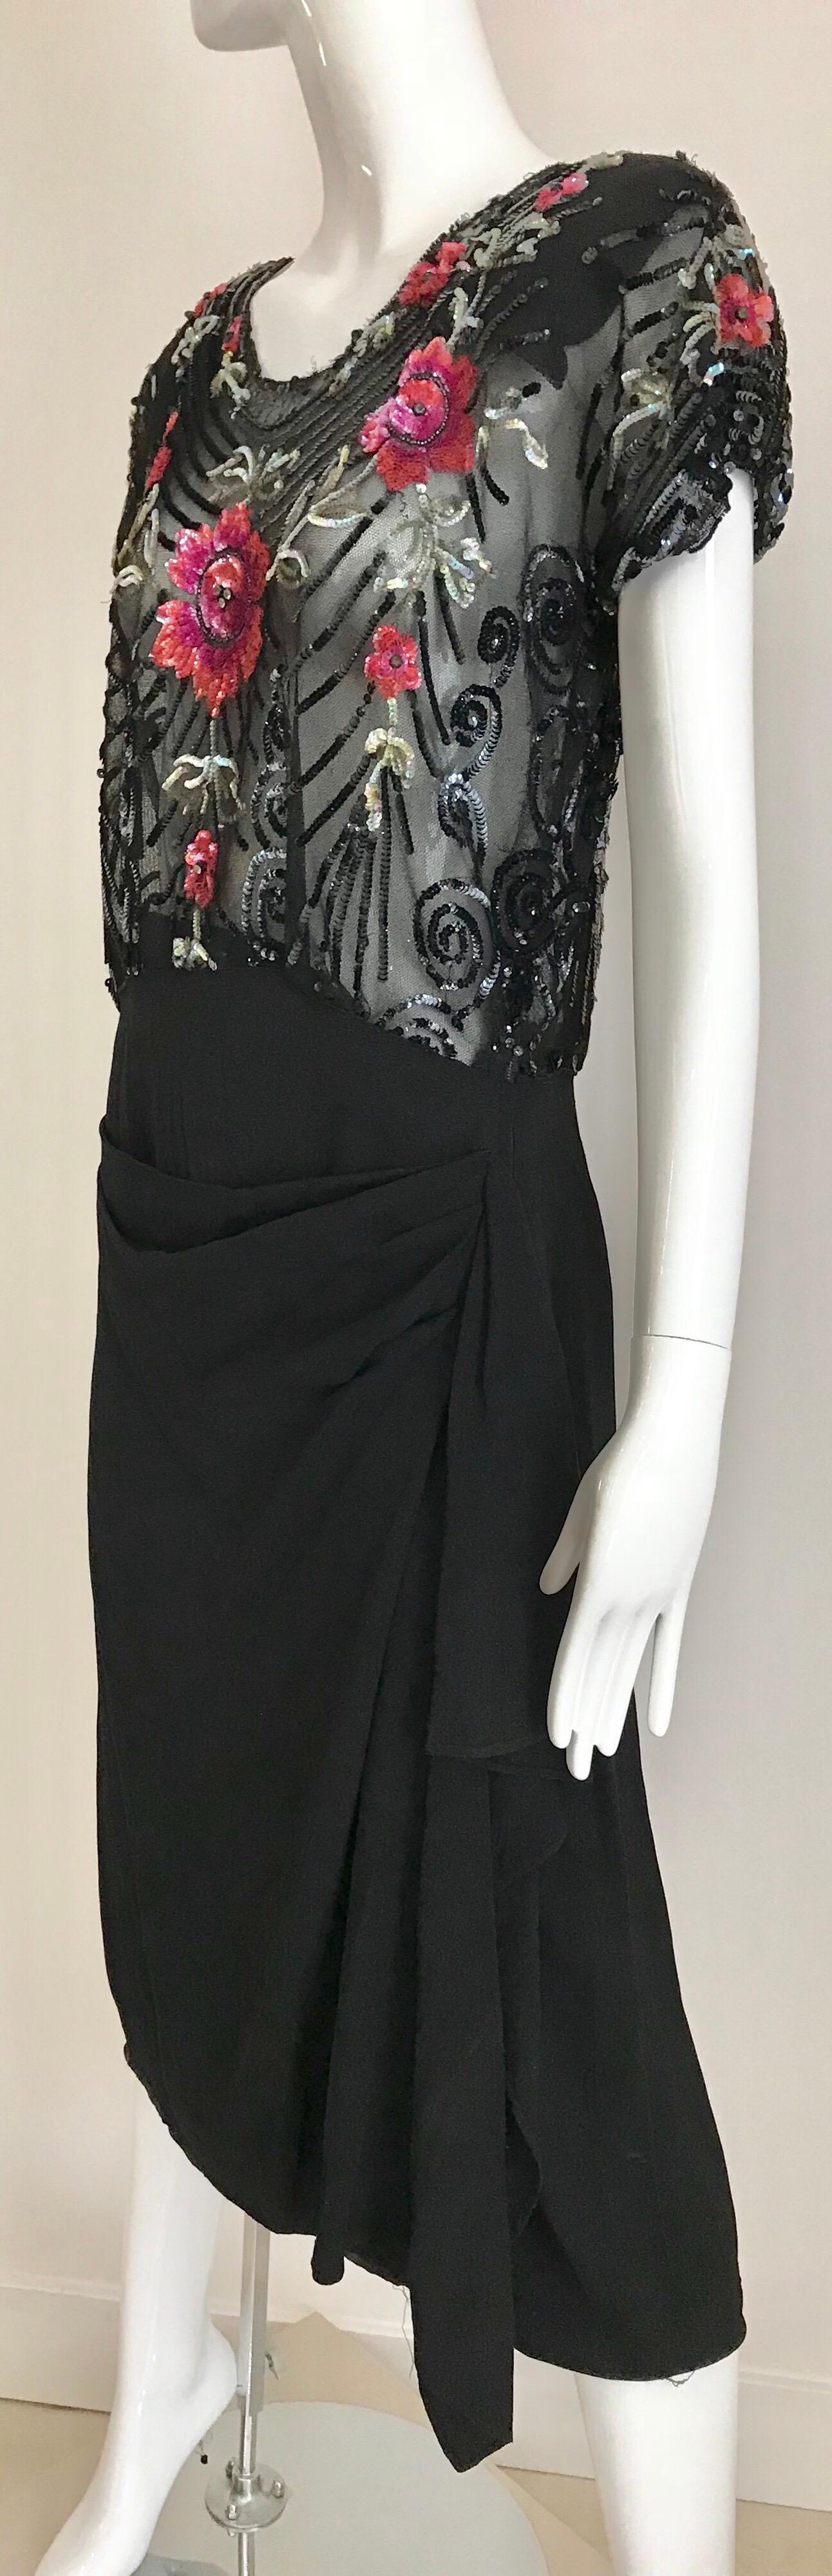 1930s Black Embroidered Sequin Crepe Cocktail Dress  2